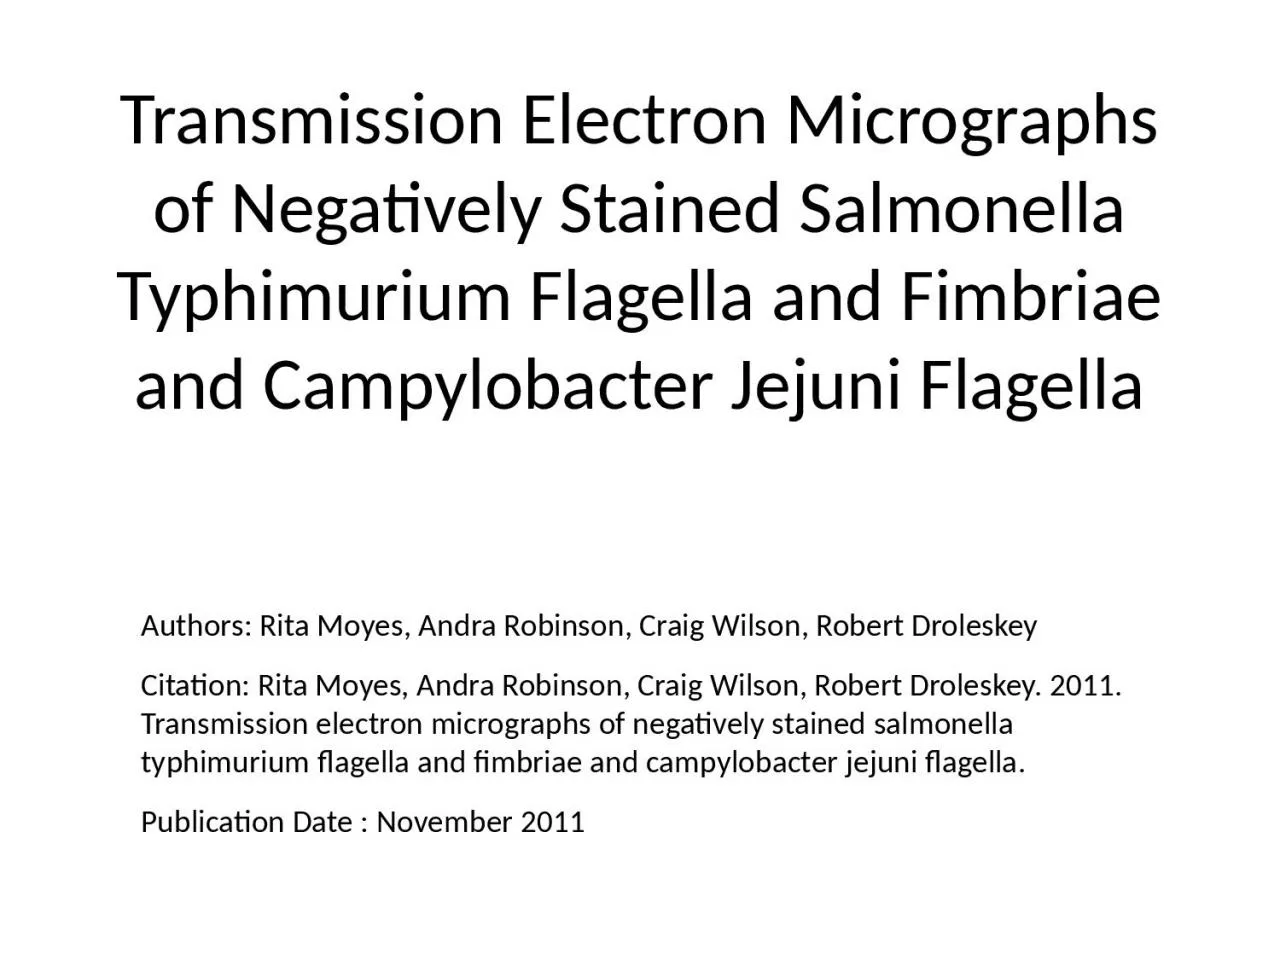 Transmission Electron Micrographs of Negatively Stained Salmonella Typhimurium Flagella